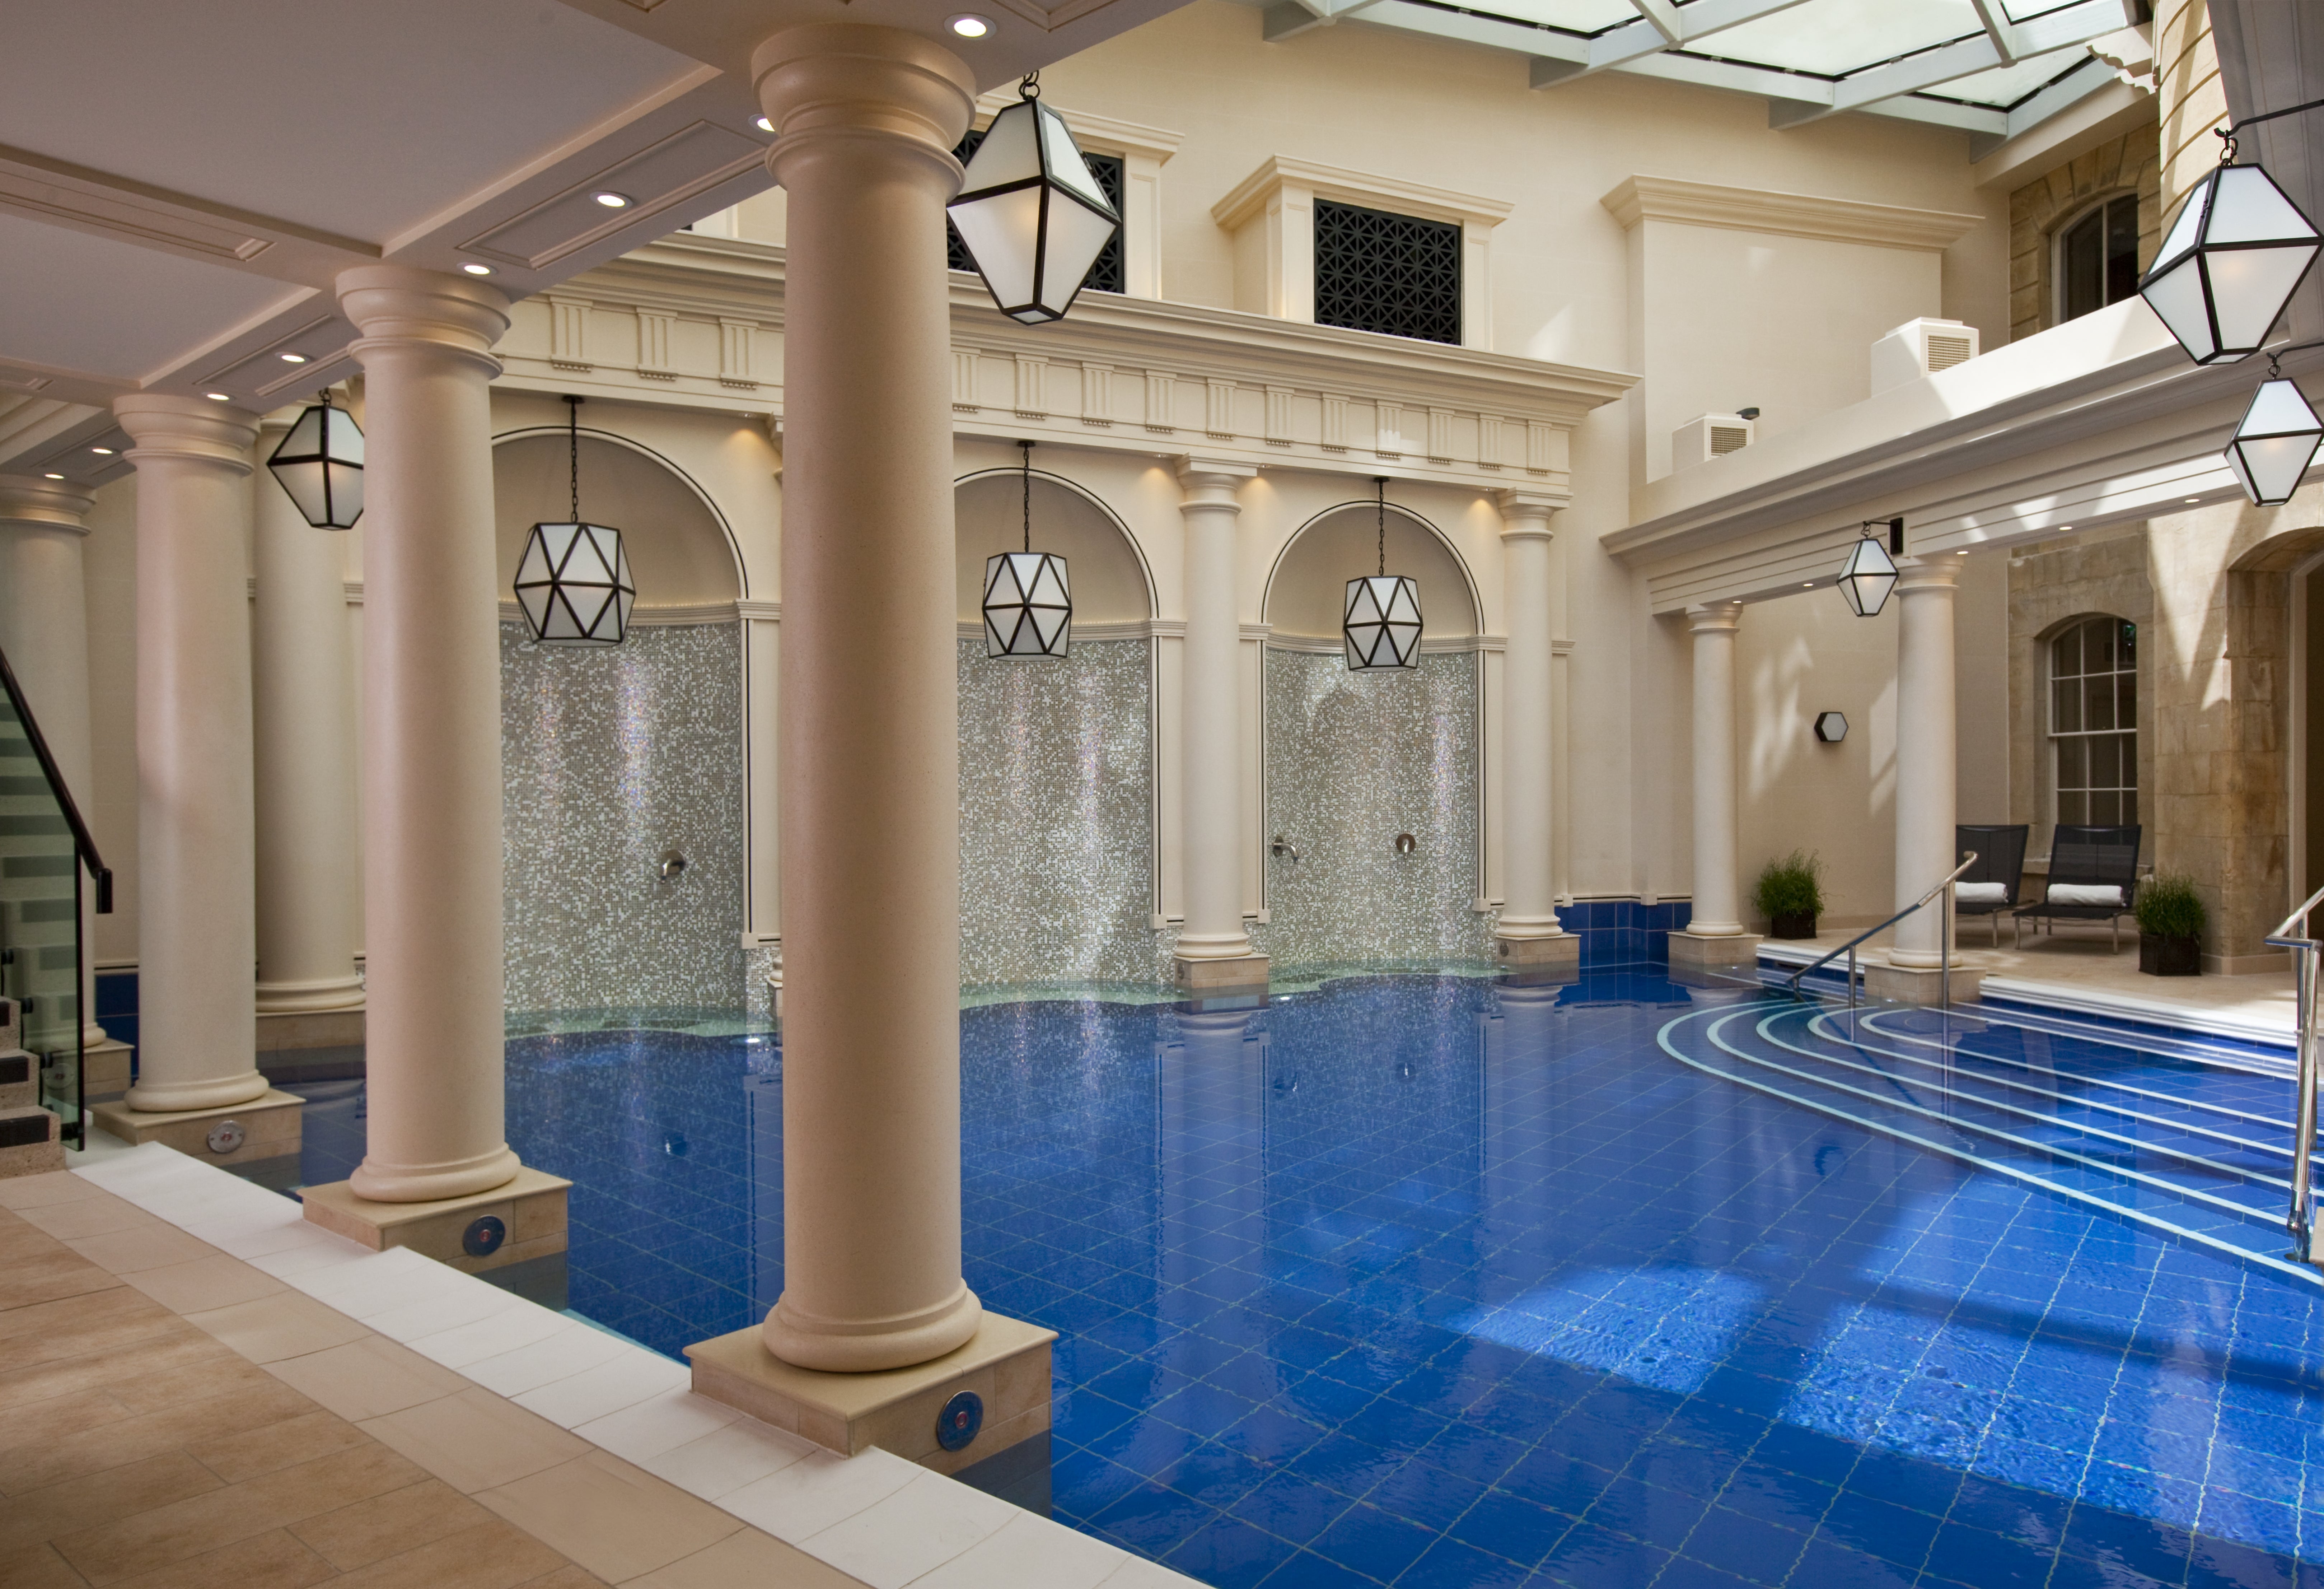 The Spa Village at The Gainsborough allows guests to access the natural thermal water of Bath